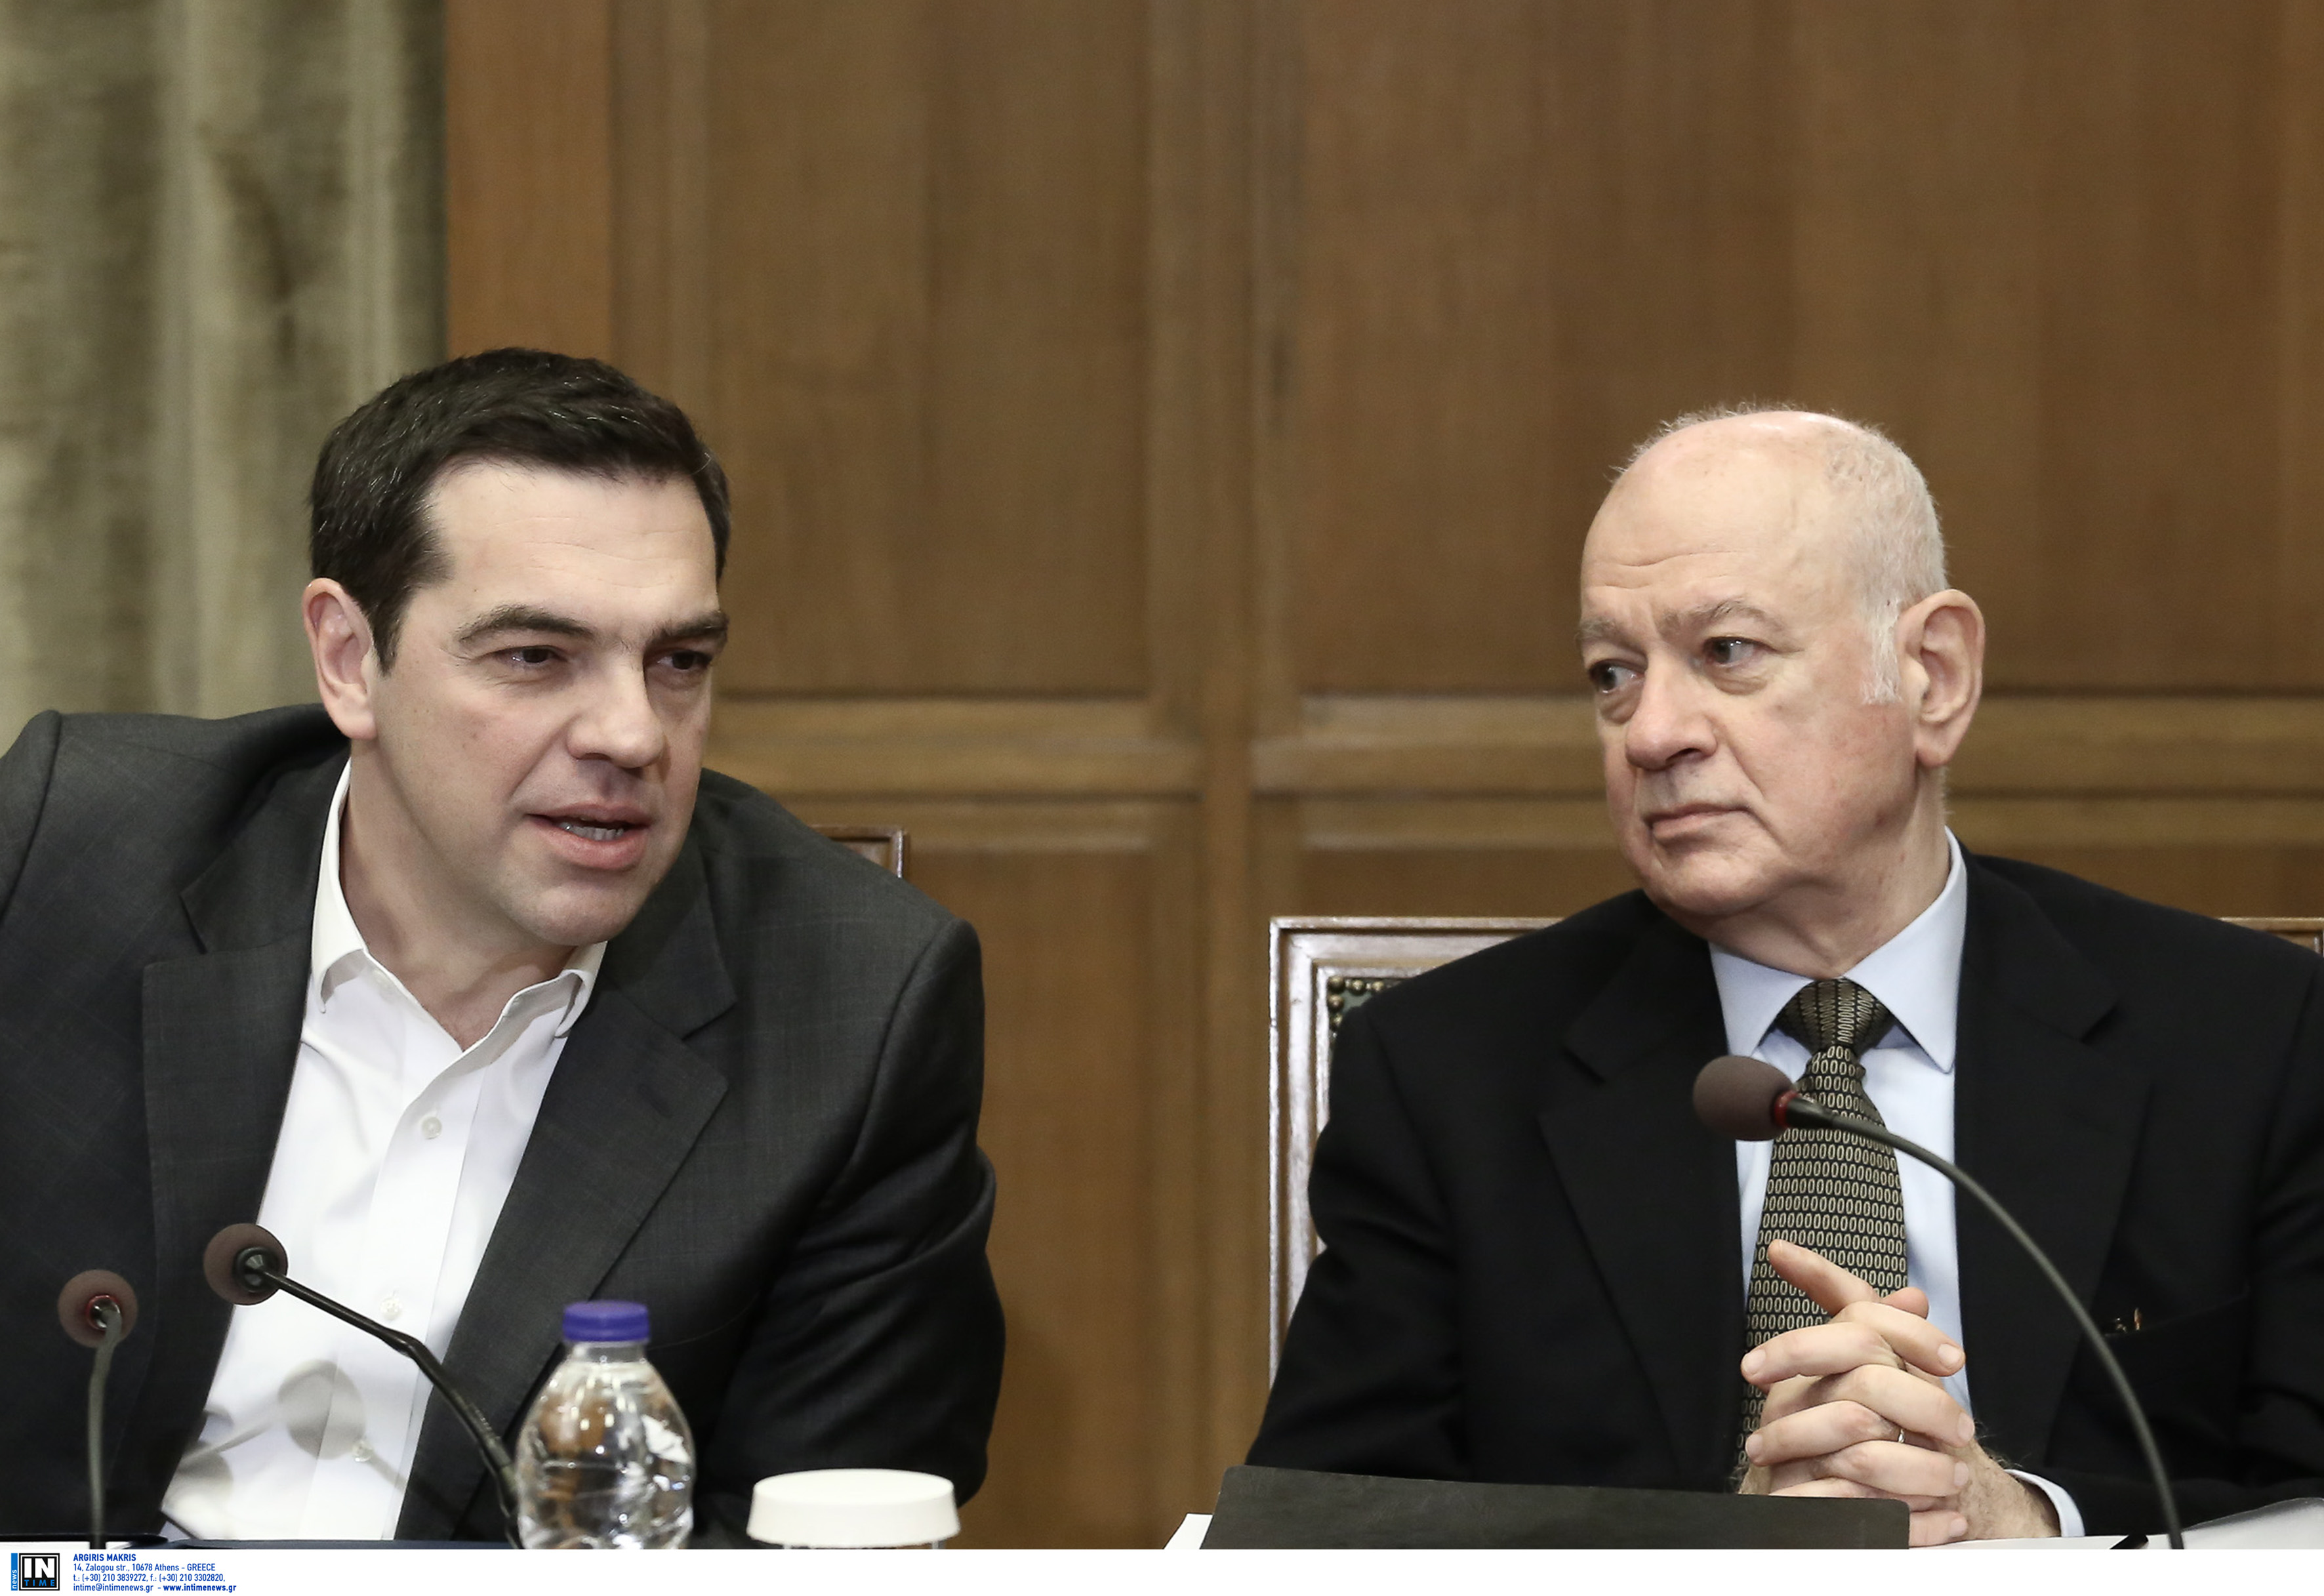 Papadimitriou, Antonopoulos the wealthiest couple in Tsipras’ cabinet